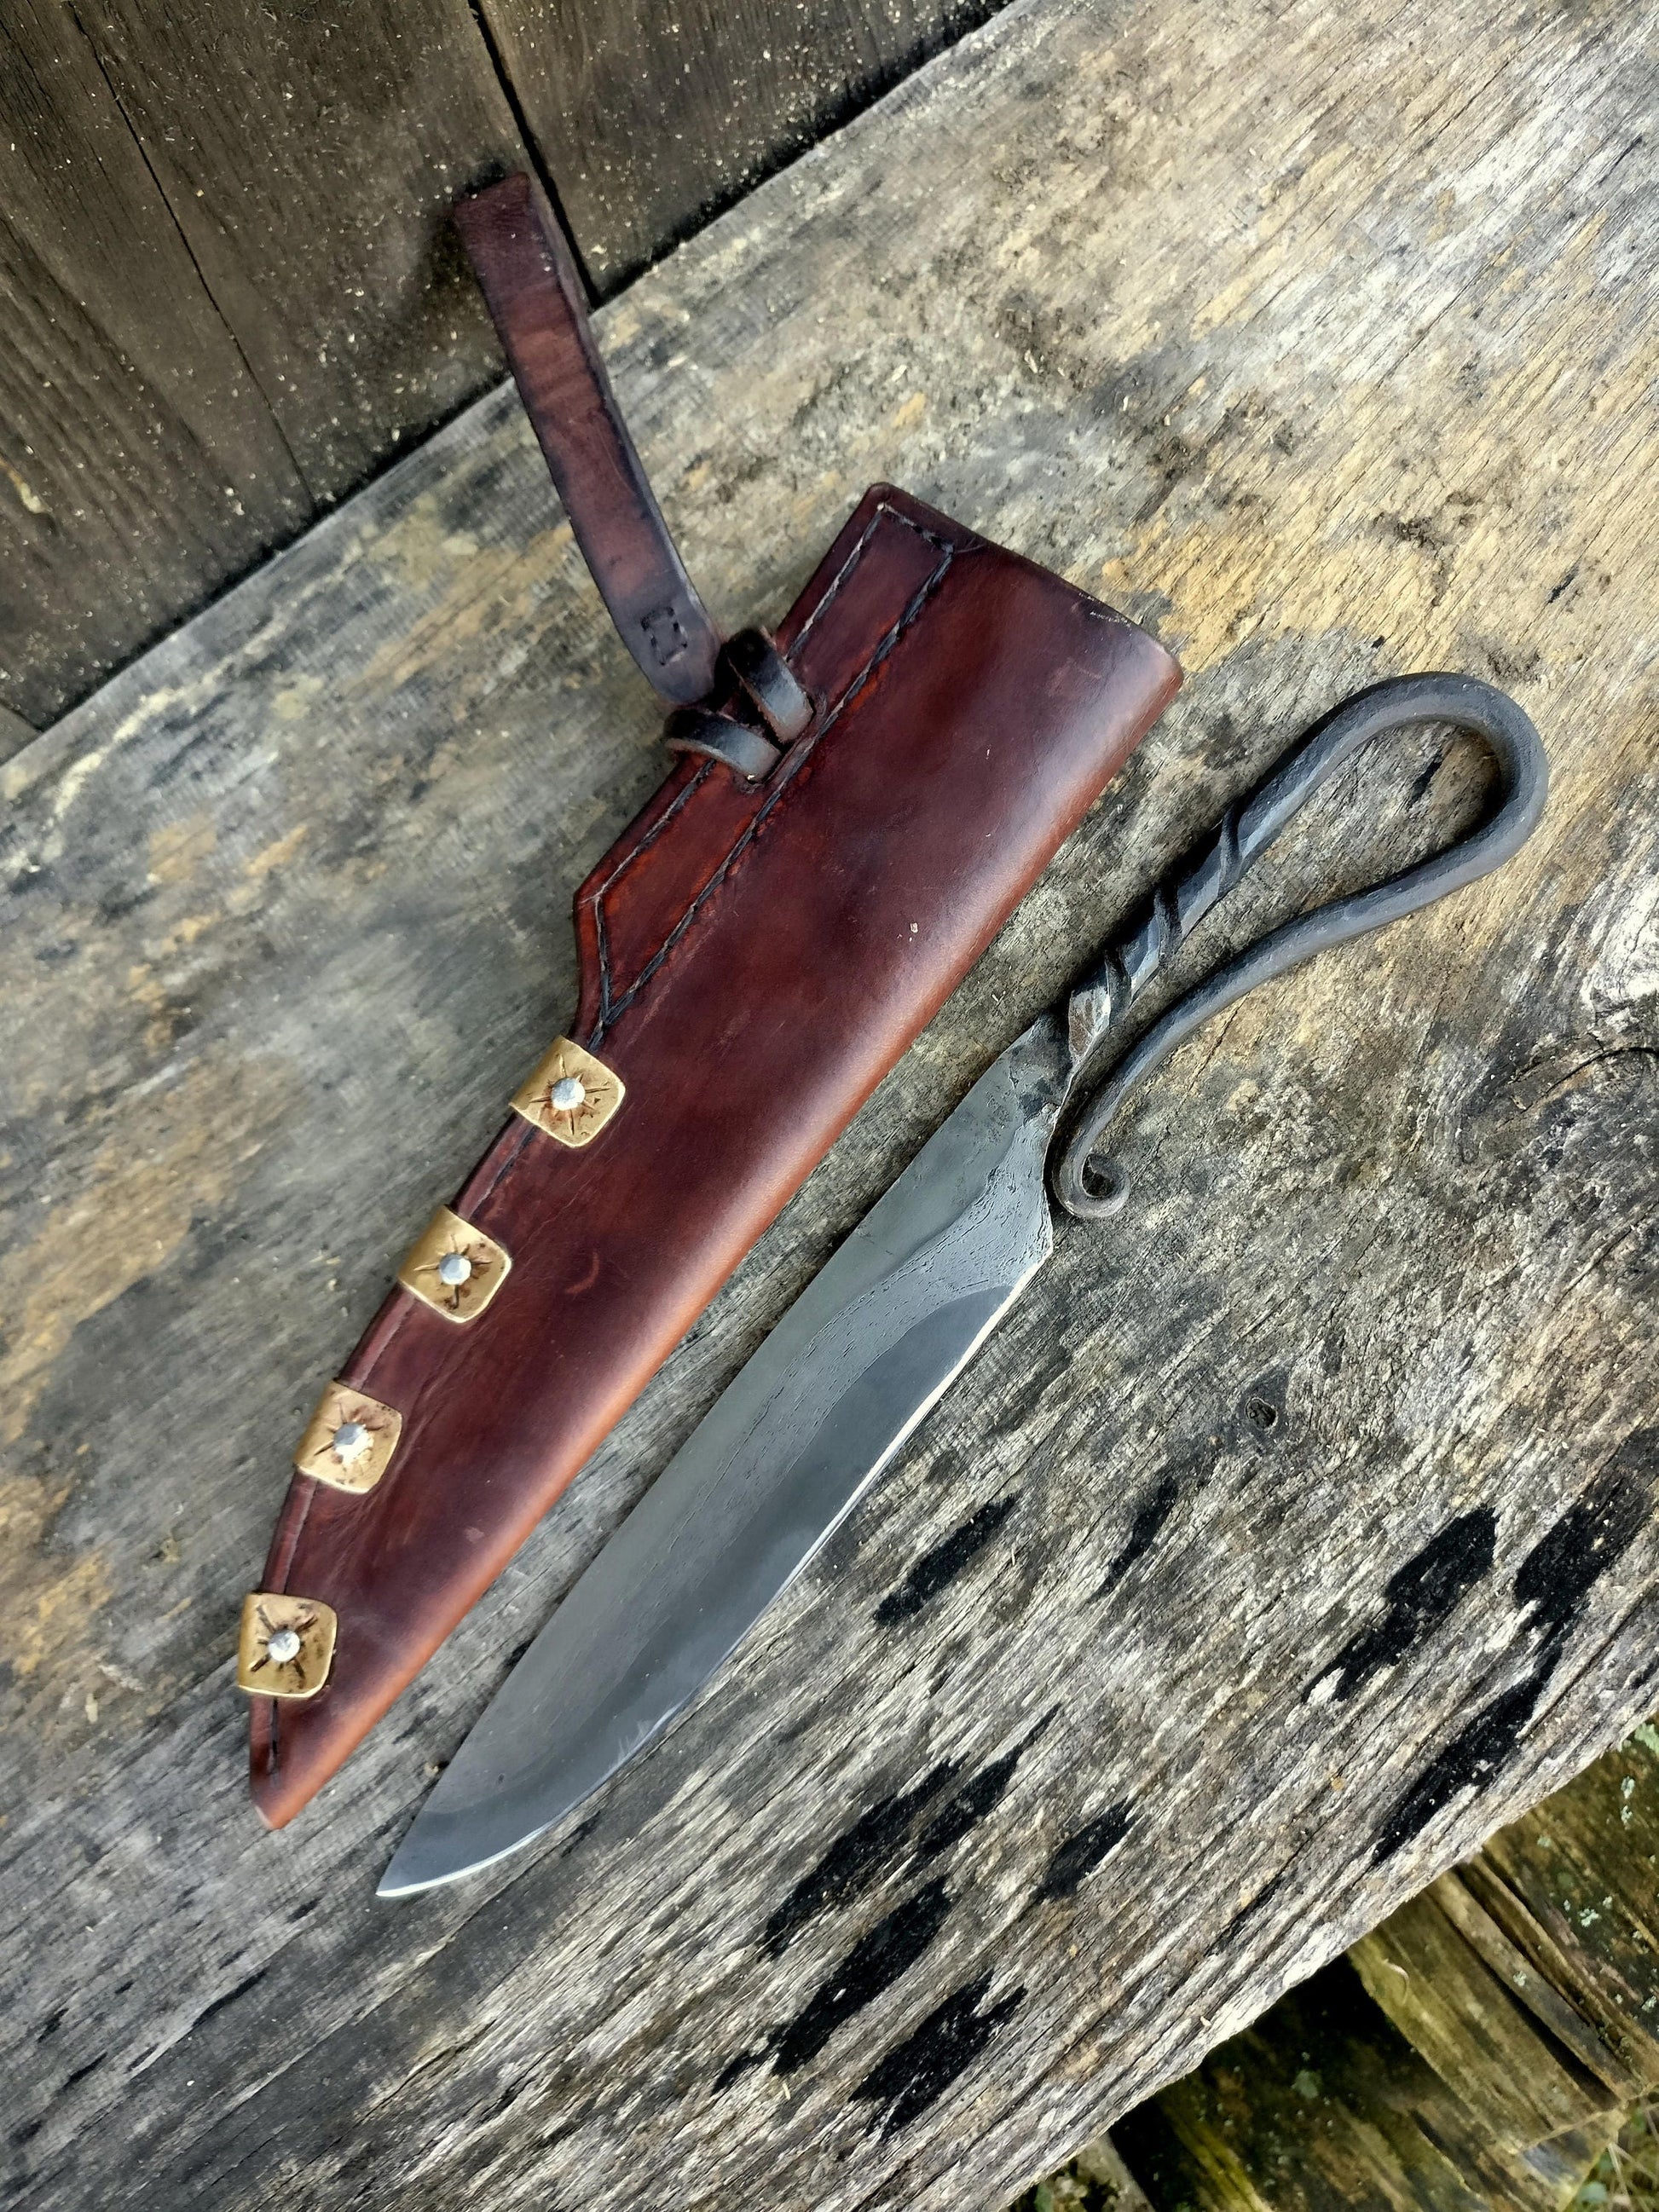 Red Skinning knife, Skinner, Small Hunting knife with leather